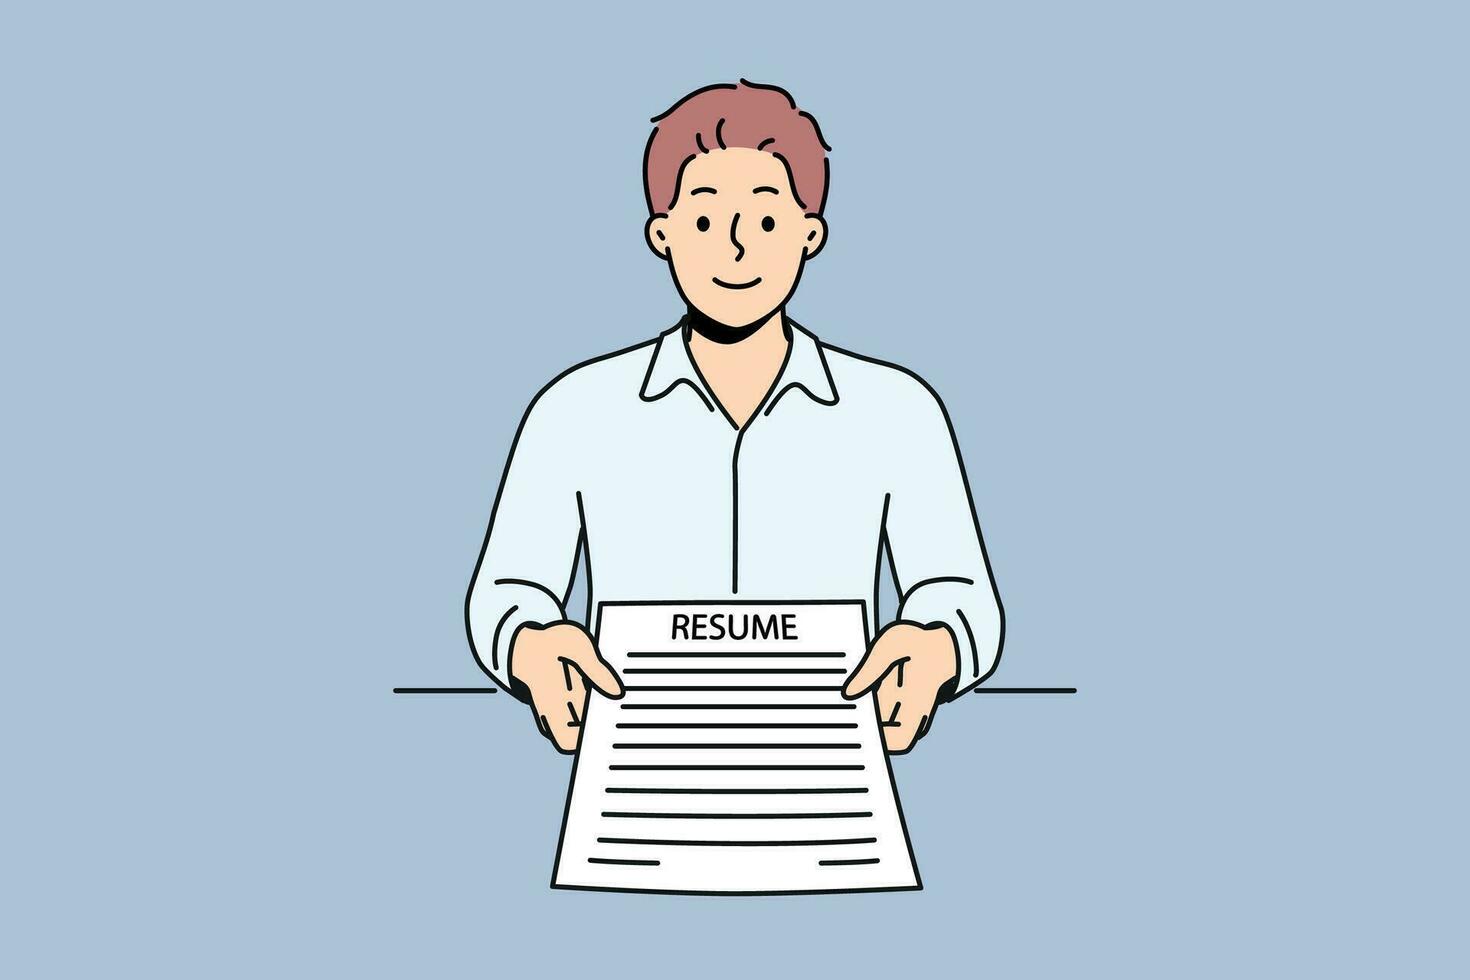 Man applicant with resume in hands came to interview in company to get desired job with high salary. Ambitious guy with resume recommends familiarizing yourself with skills and personal data vector